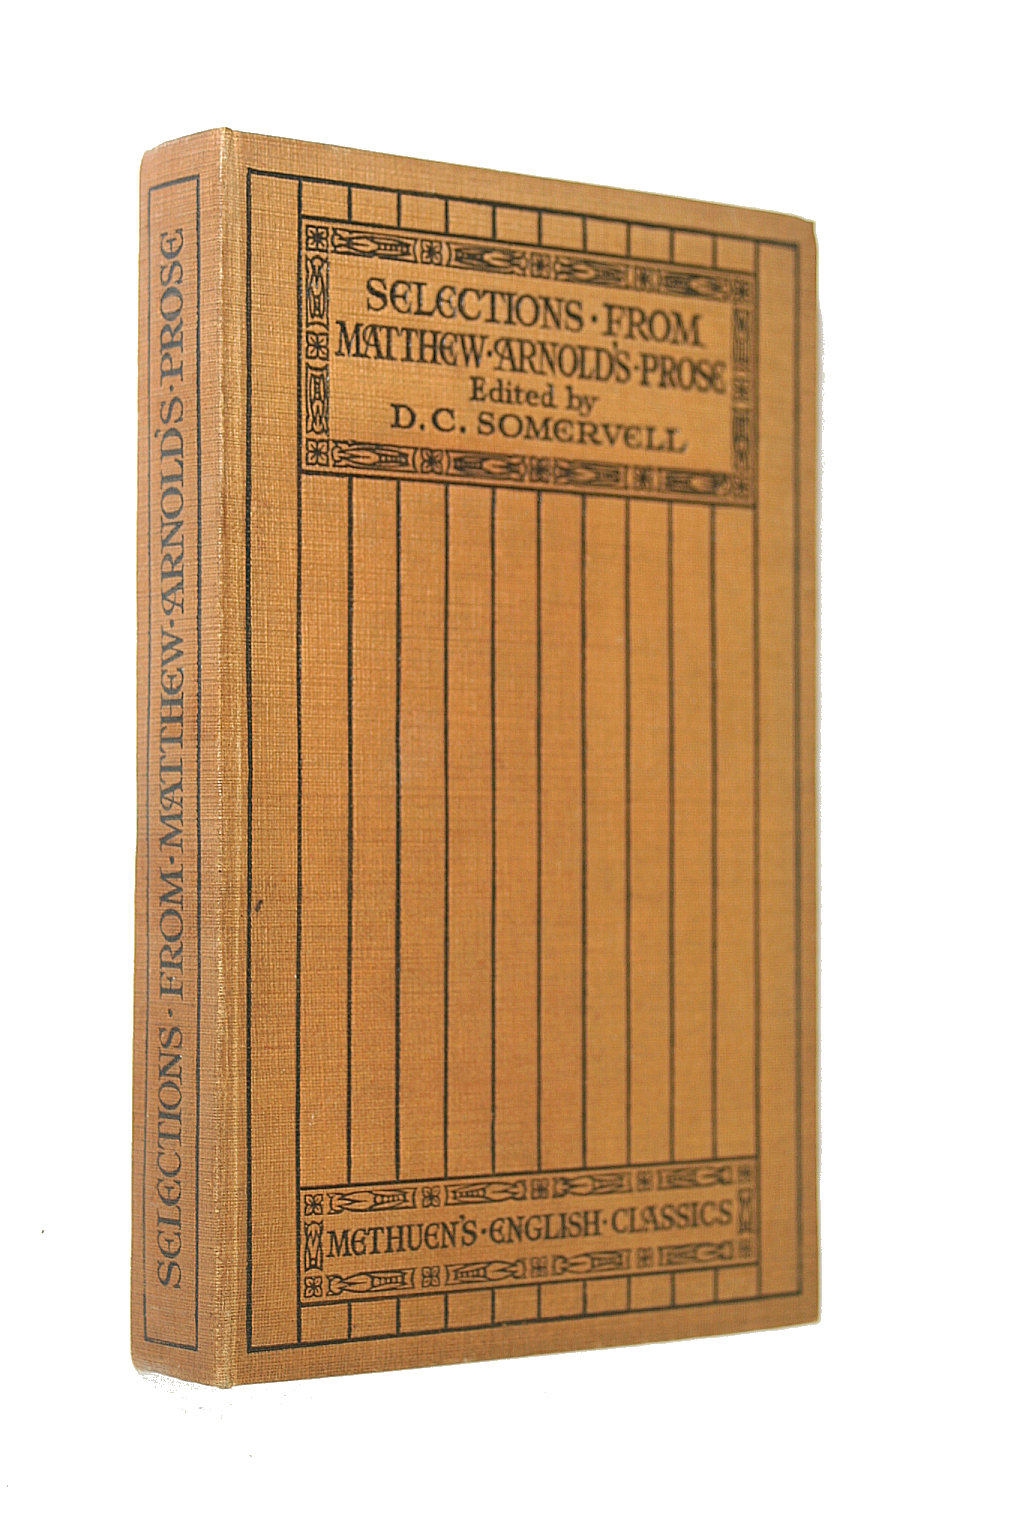 MATTHEW ARNOLD - Selections from Matthew Arnold's Prose